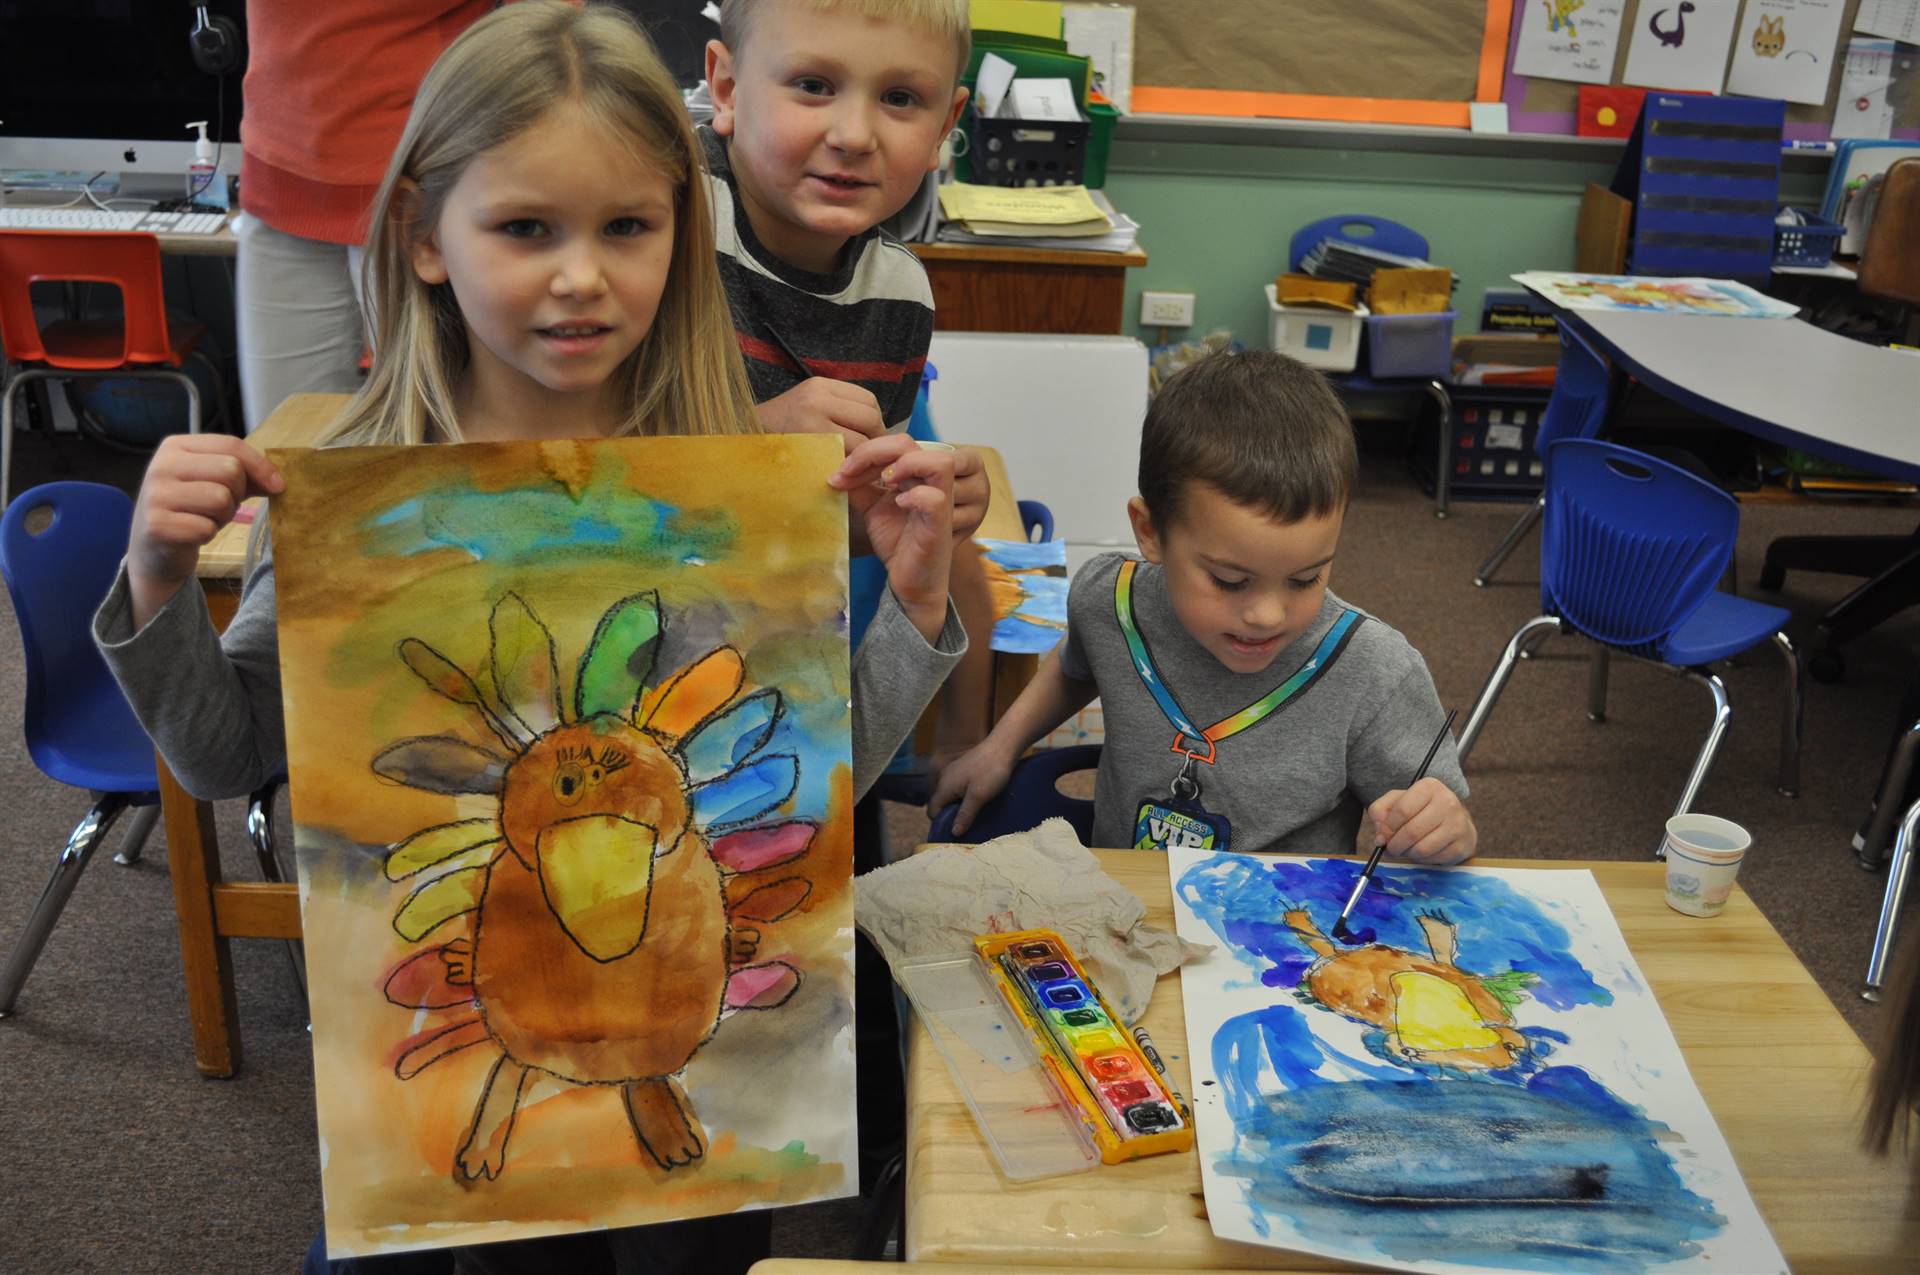 3 students watercolor painting.